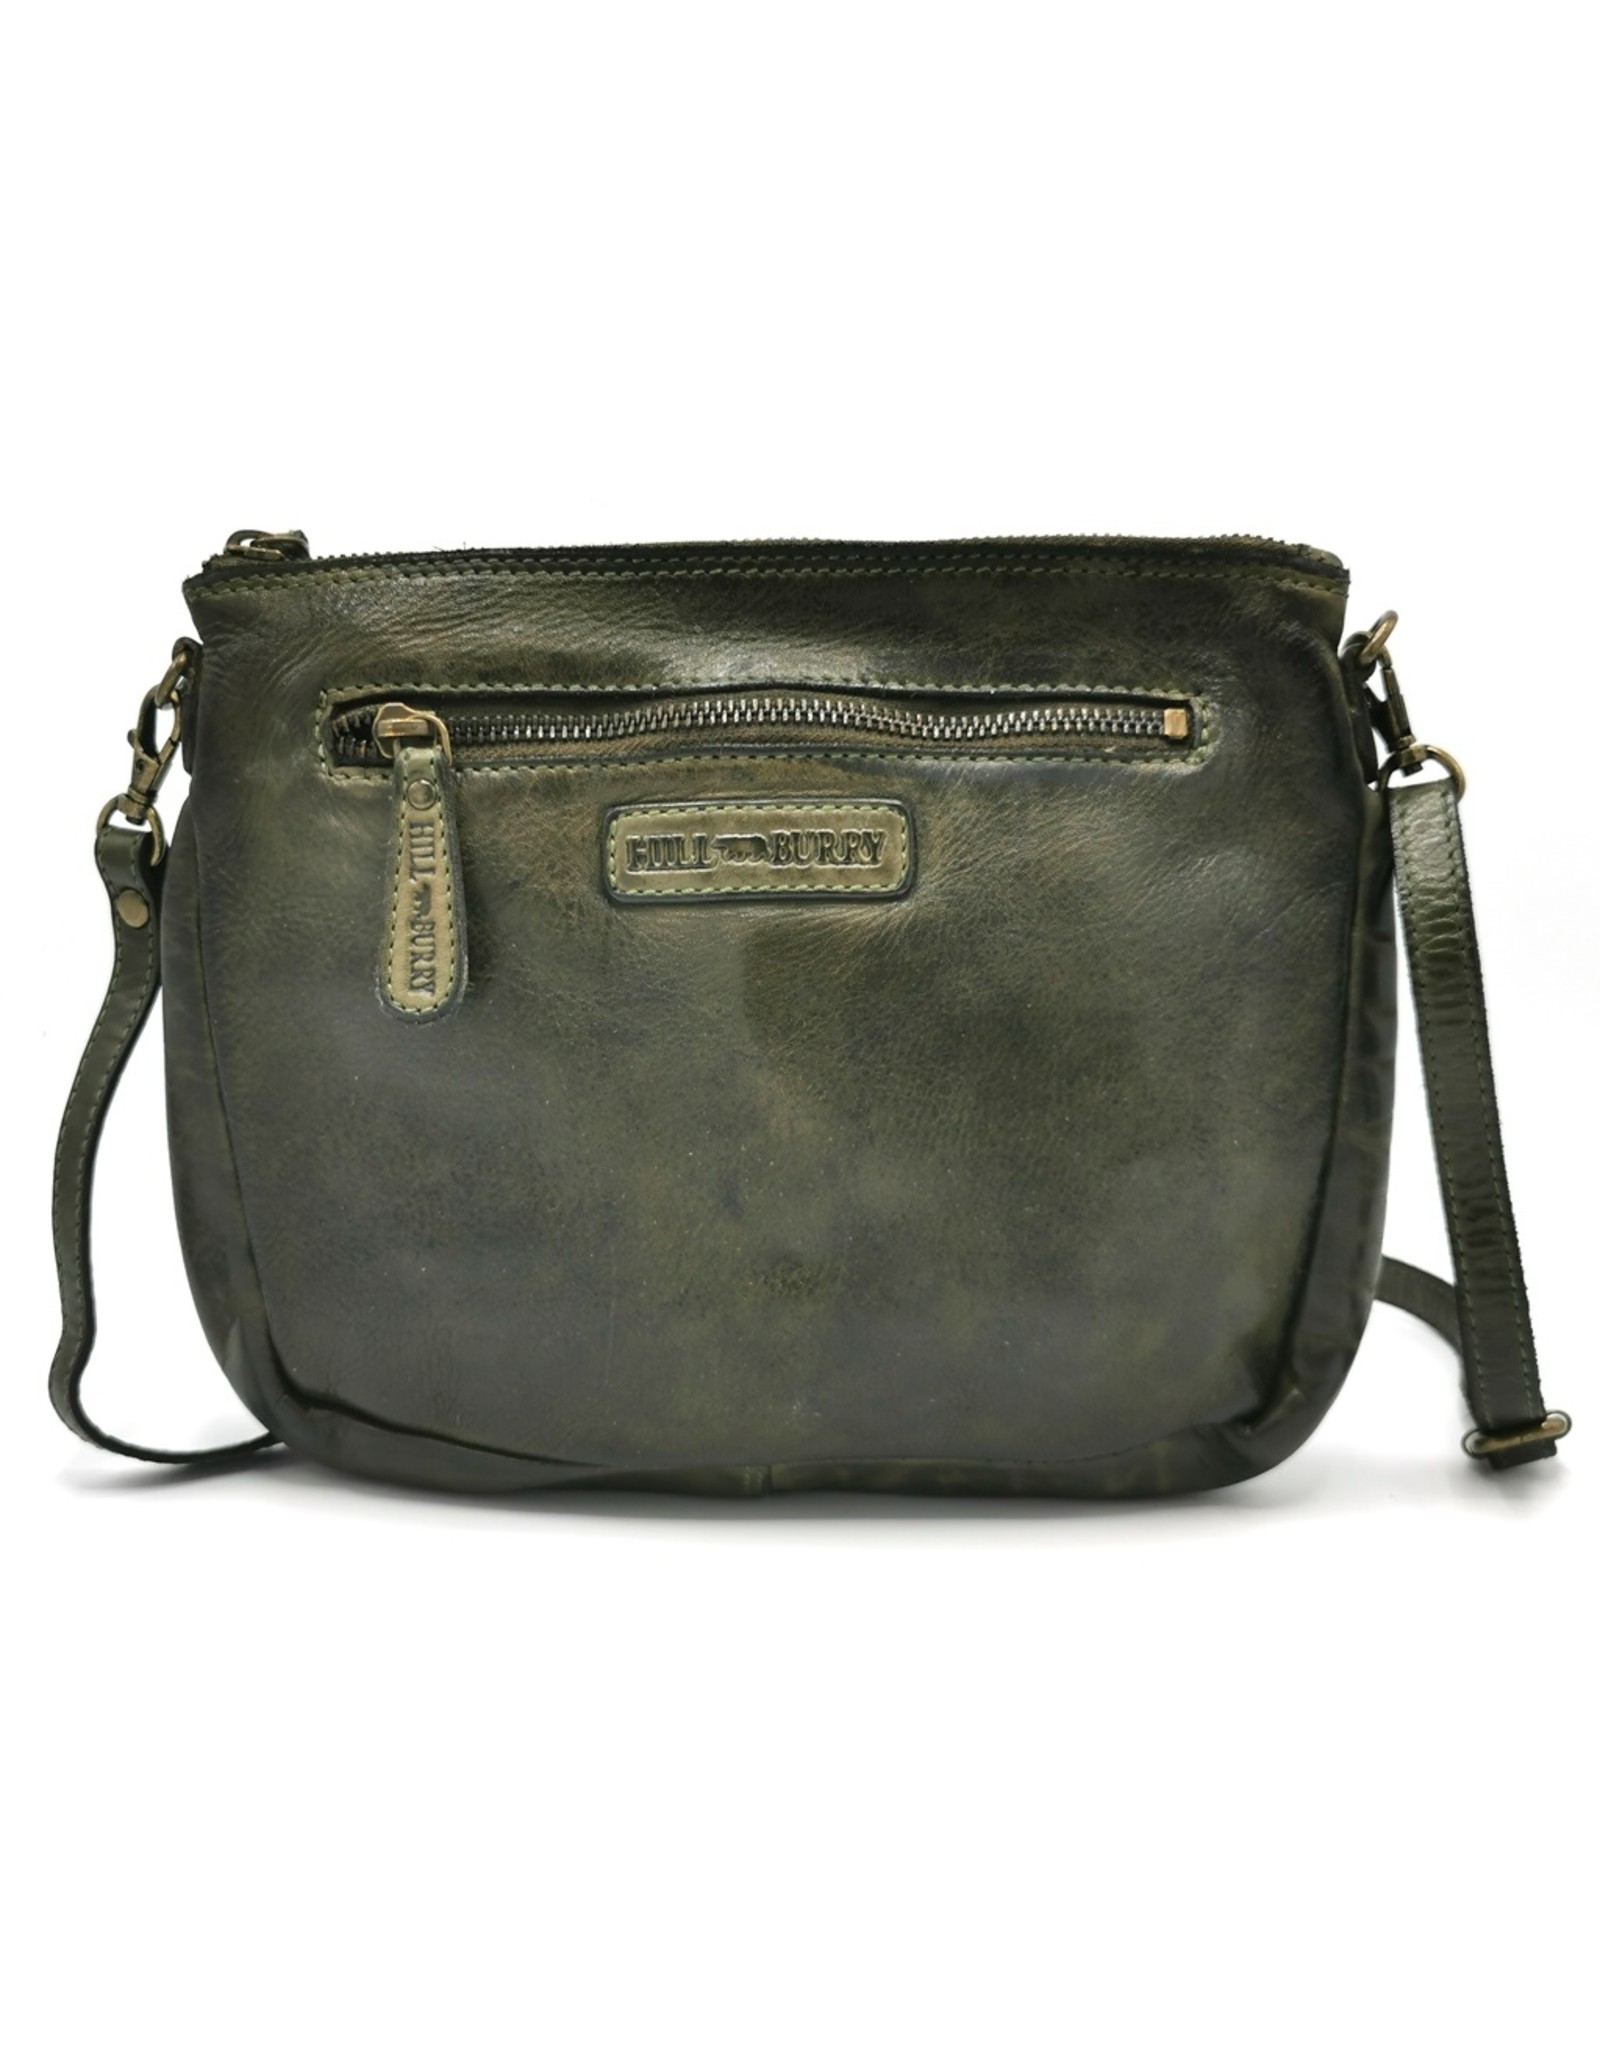 HillBurry Small leather bags, clutches and more - Hillburry Shoulder Bag - Clutch Washed Leather khaki